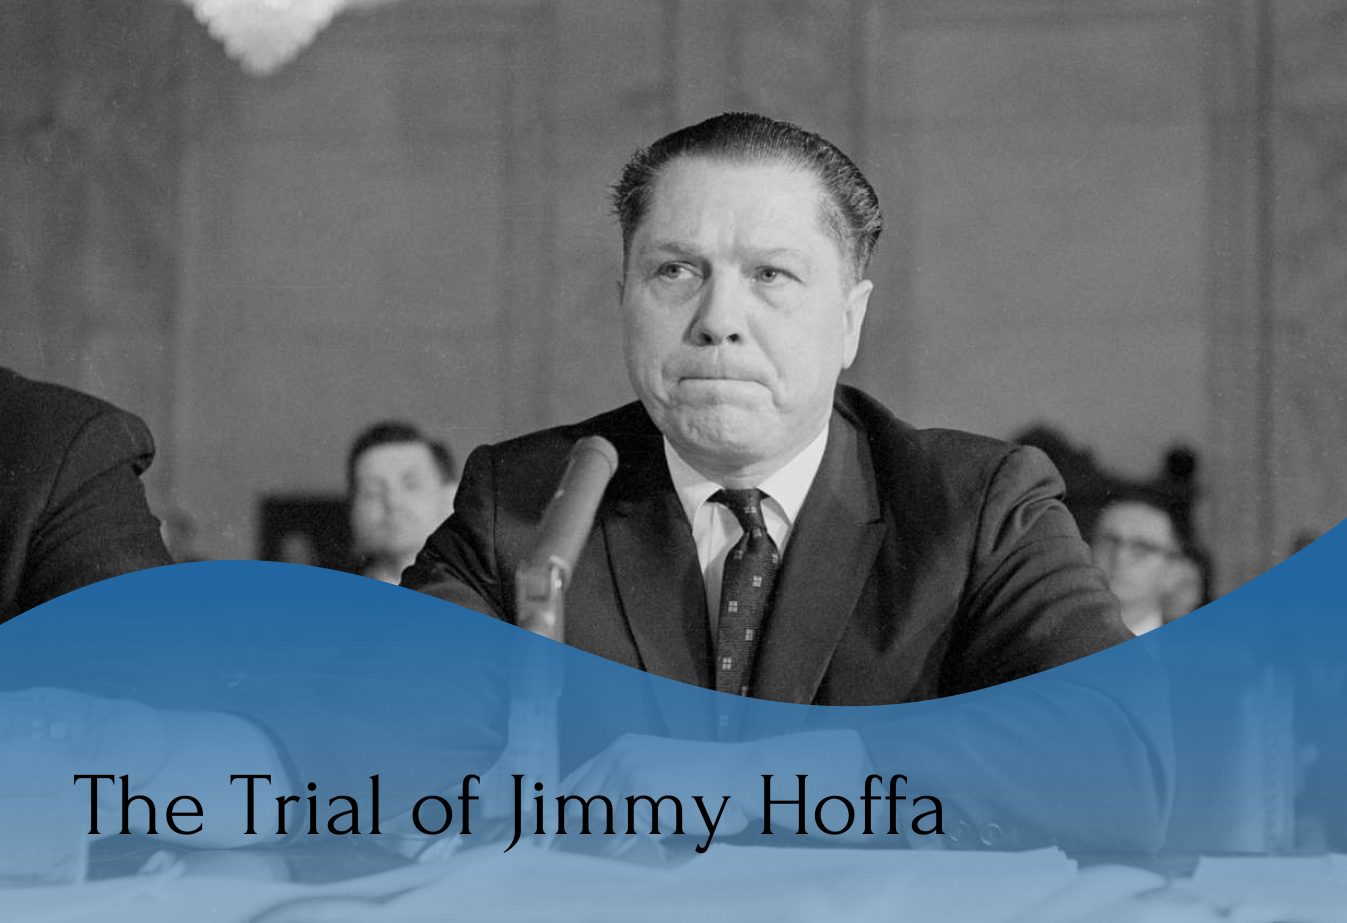 A black and white photo of a man sitting in a court room and a written text of "The trial of Jimmy Hoffa".